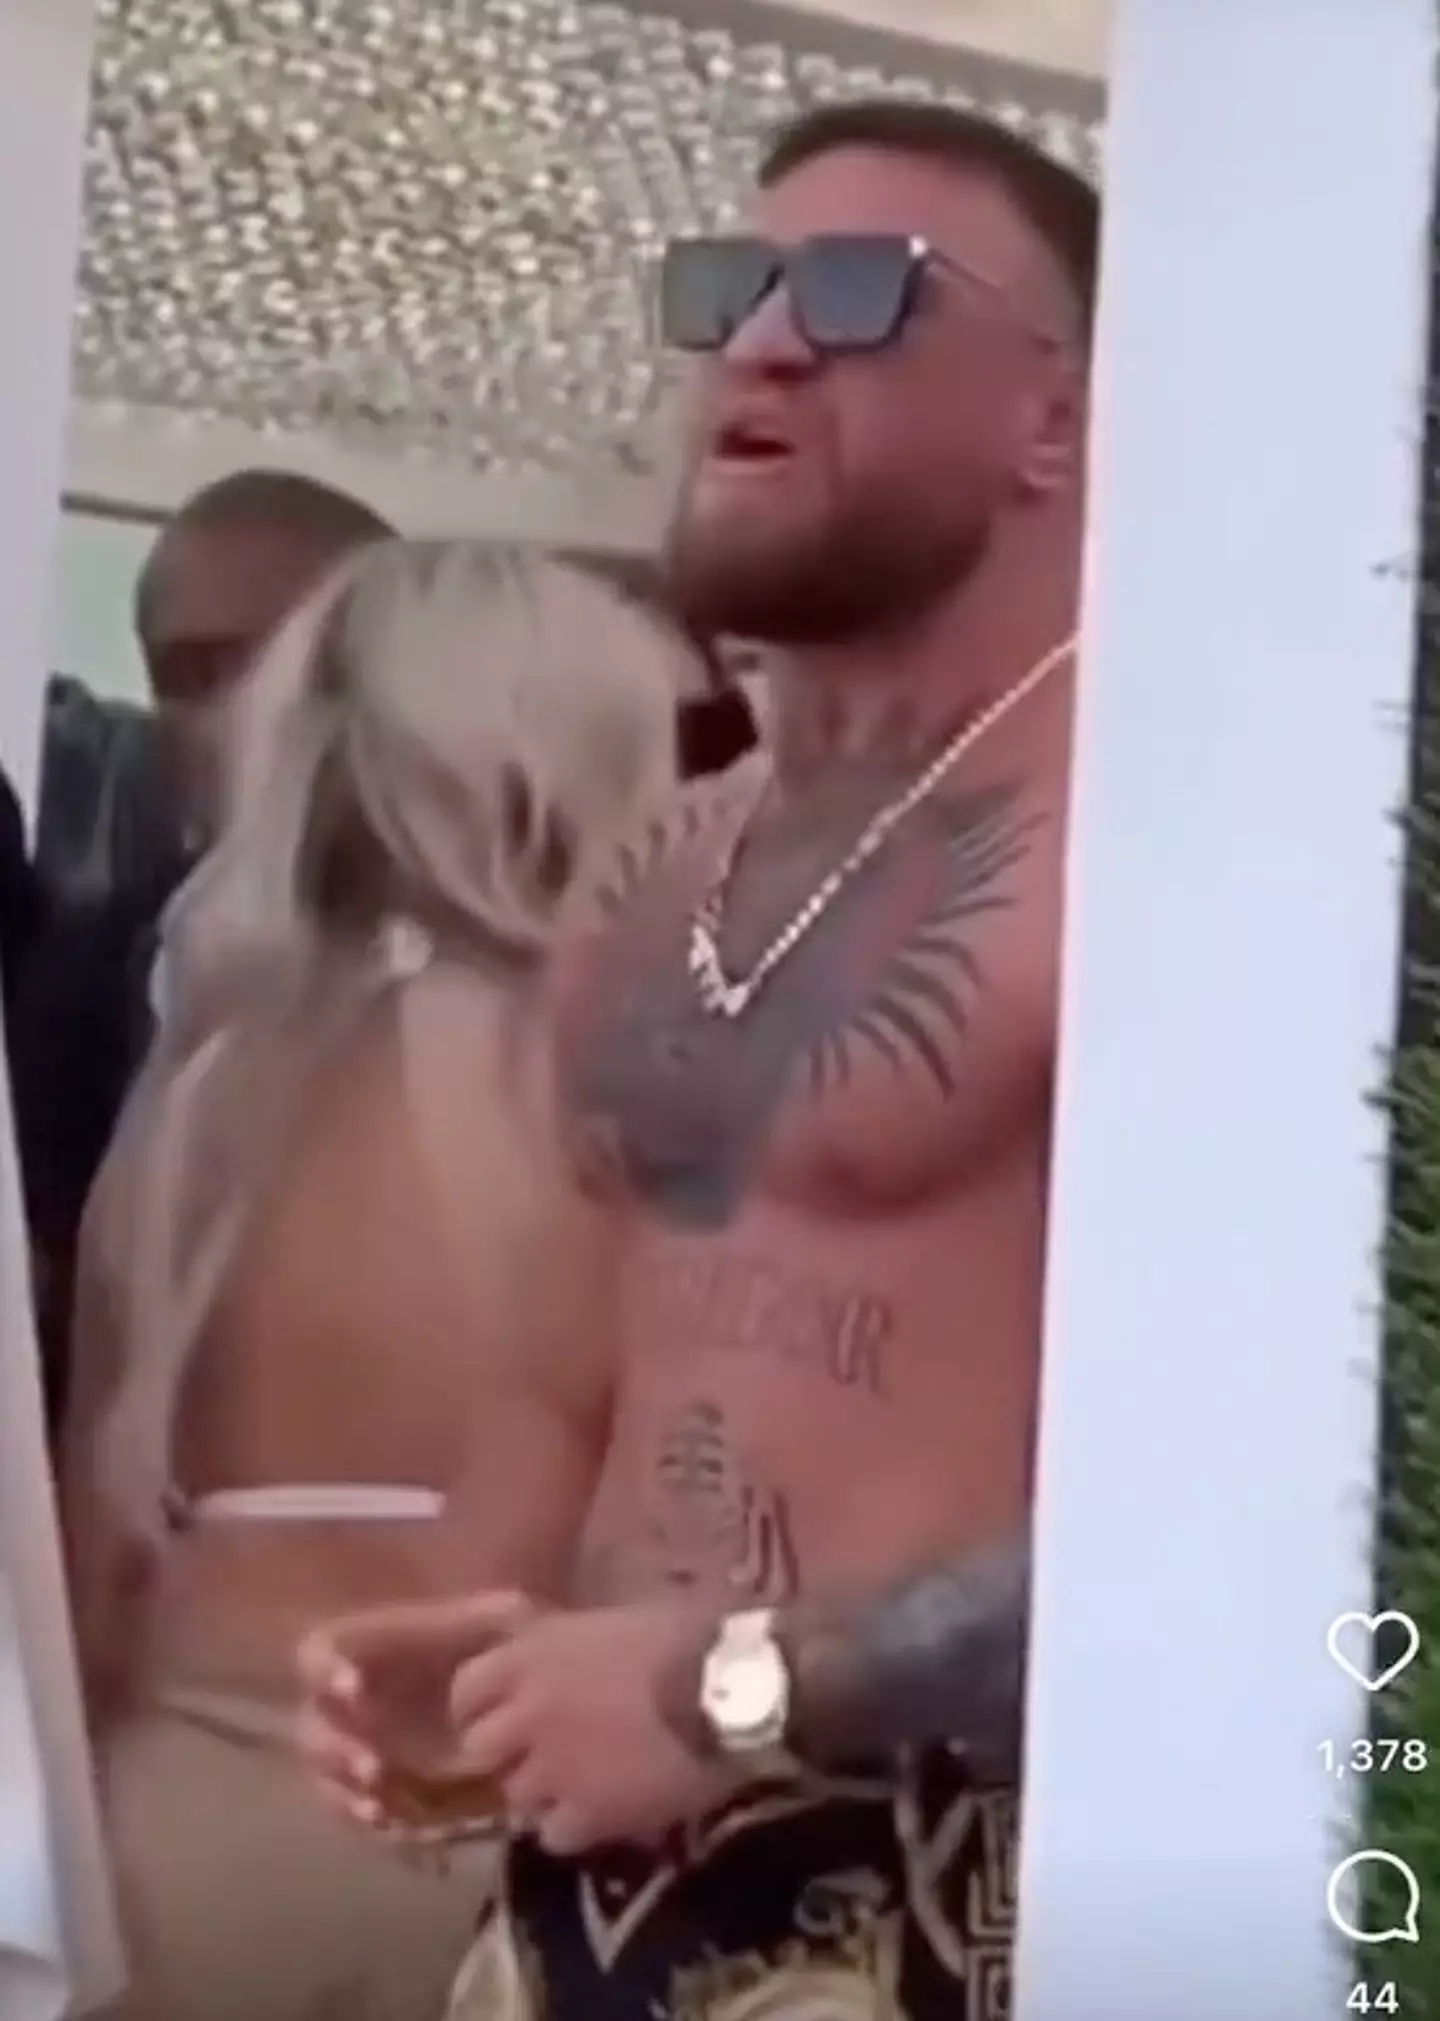 The UFC star was celebrating his 34th Birthday with friends and family by throwing a lavish doo at what looked like a beach club.